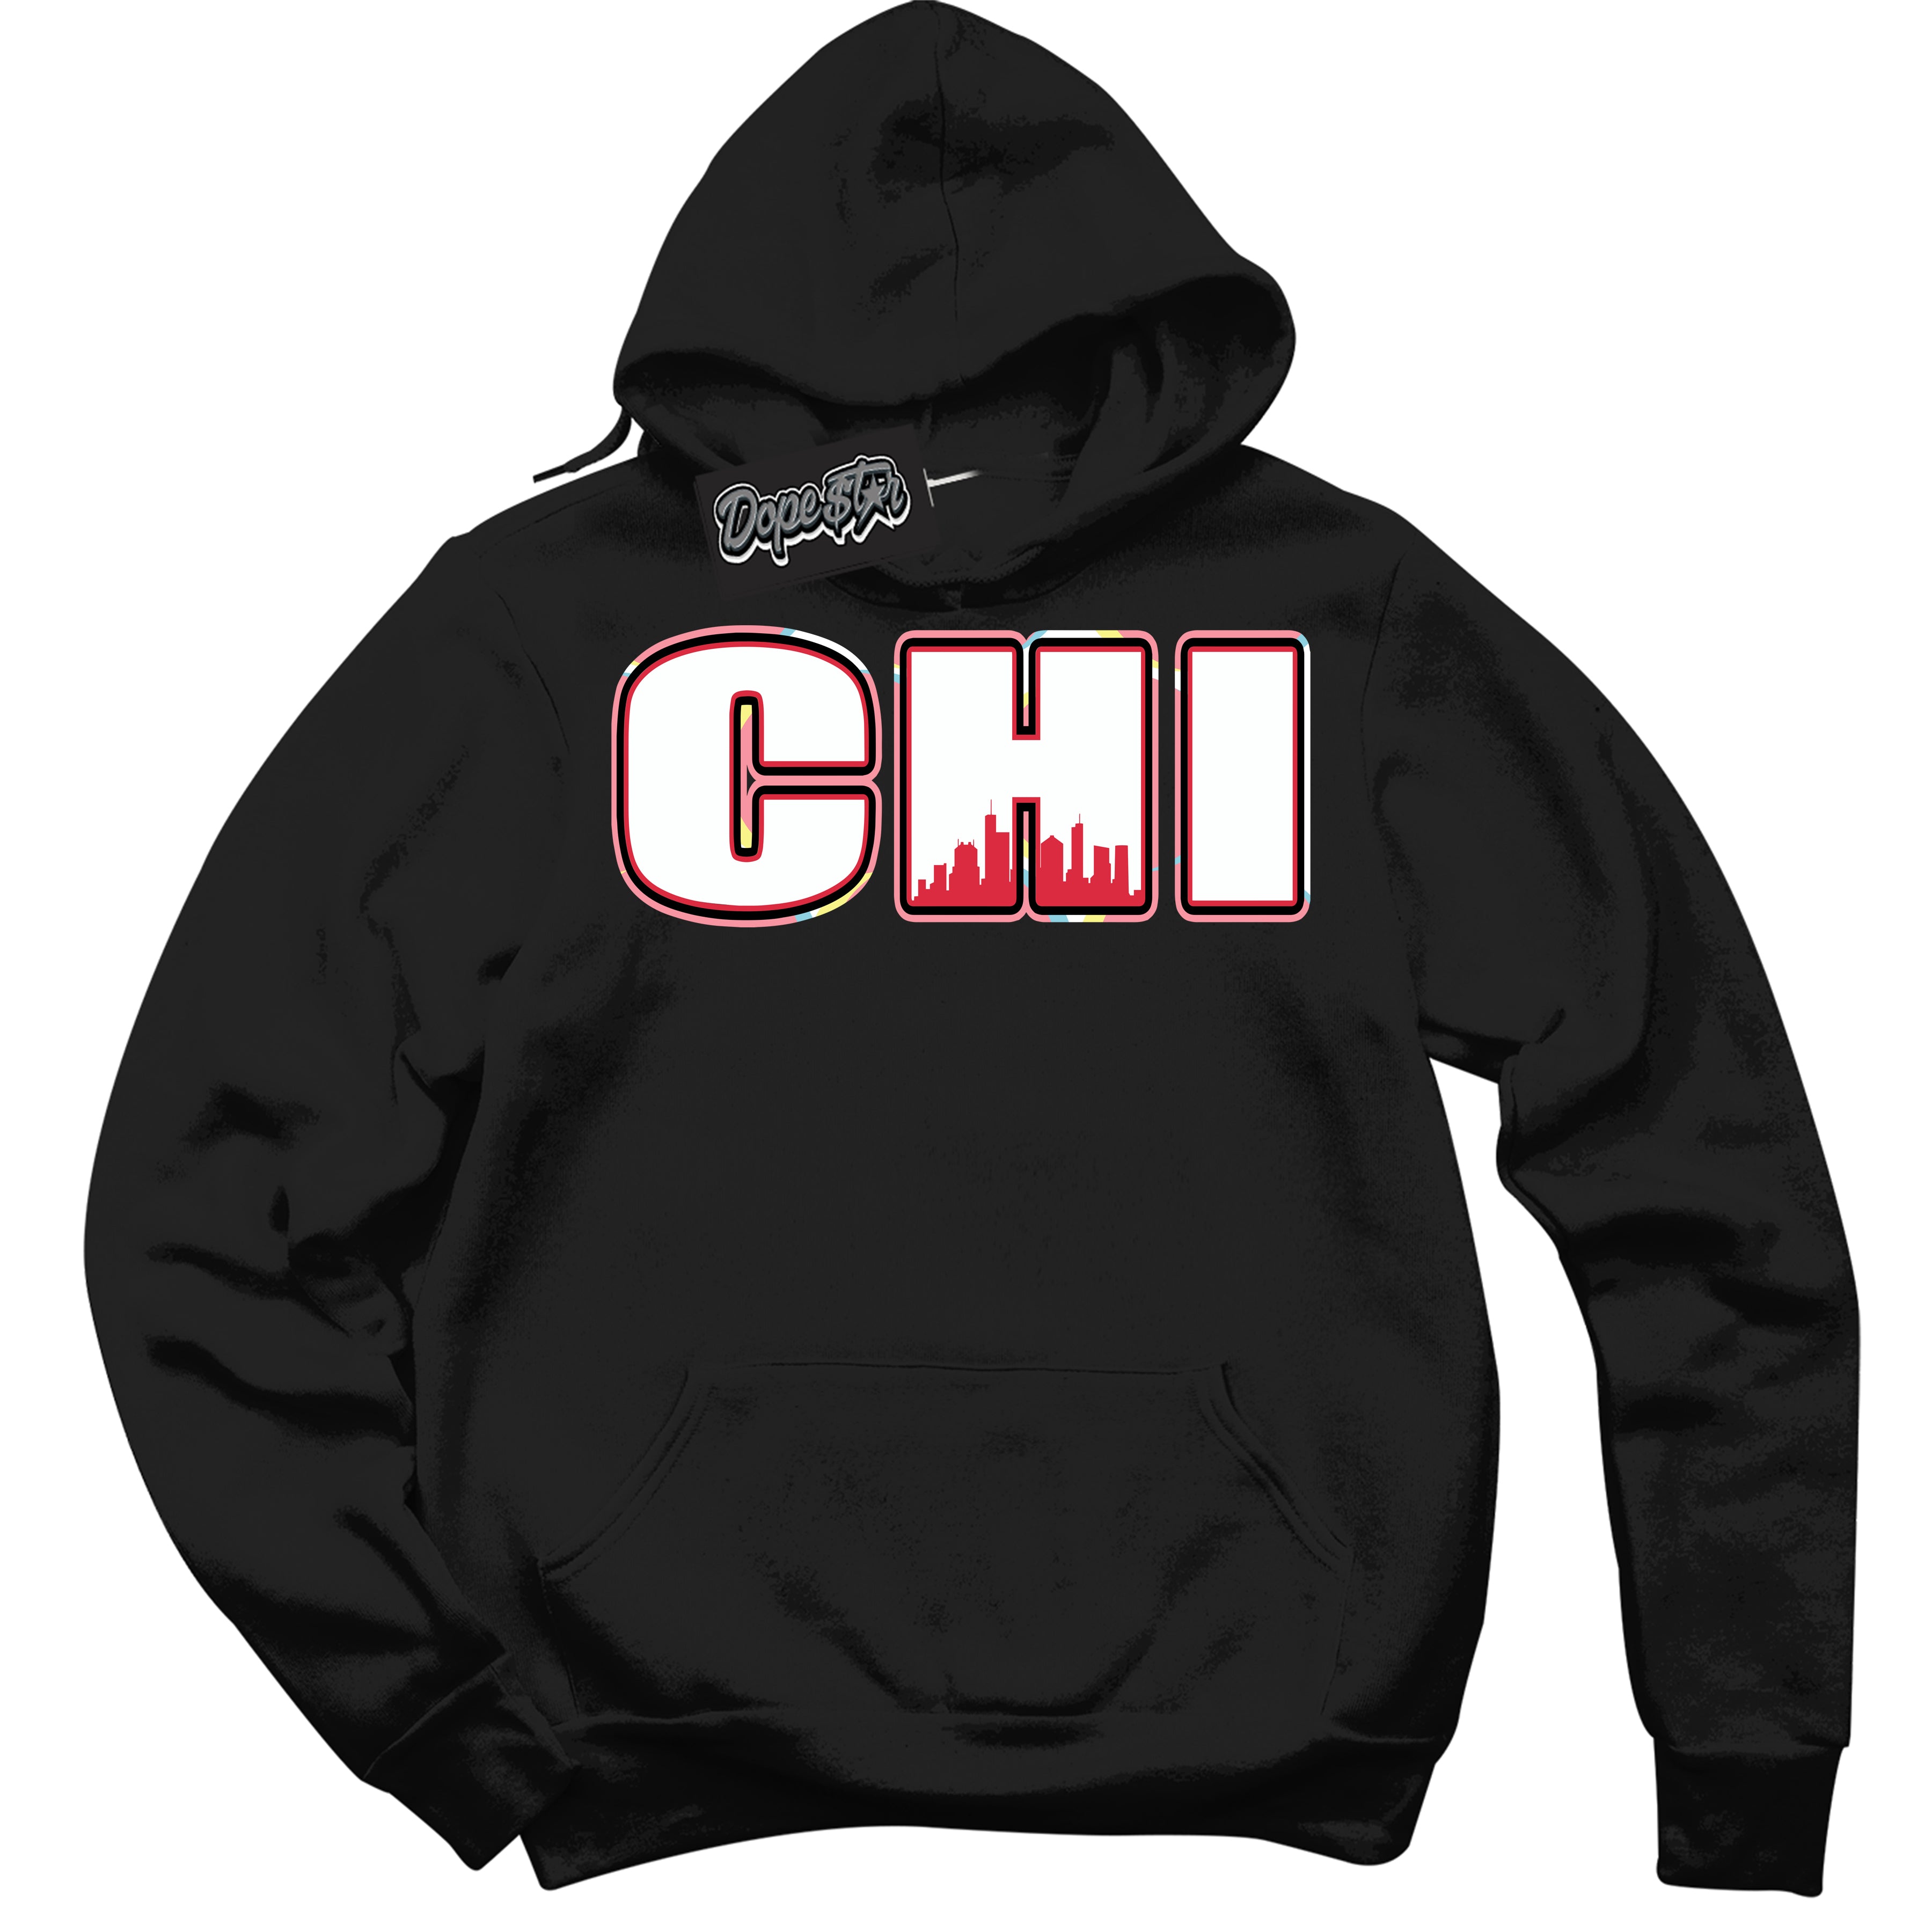 Cool Black Graphic DopeStar Hoodie with “ Chicago “ print, that perfectly matches Spider-Verse 1s sneakers